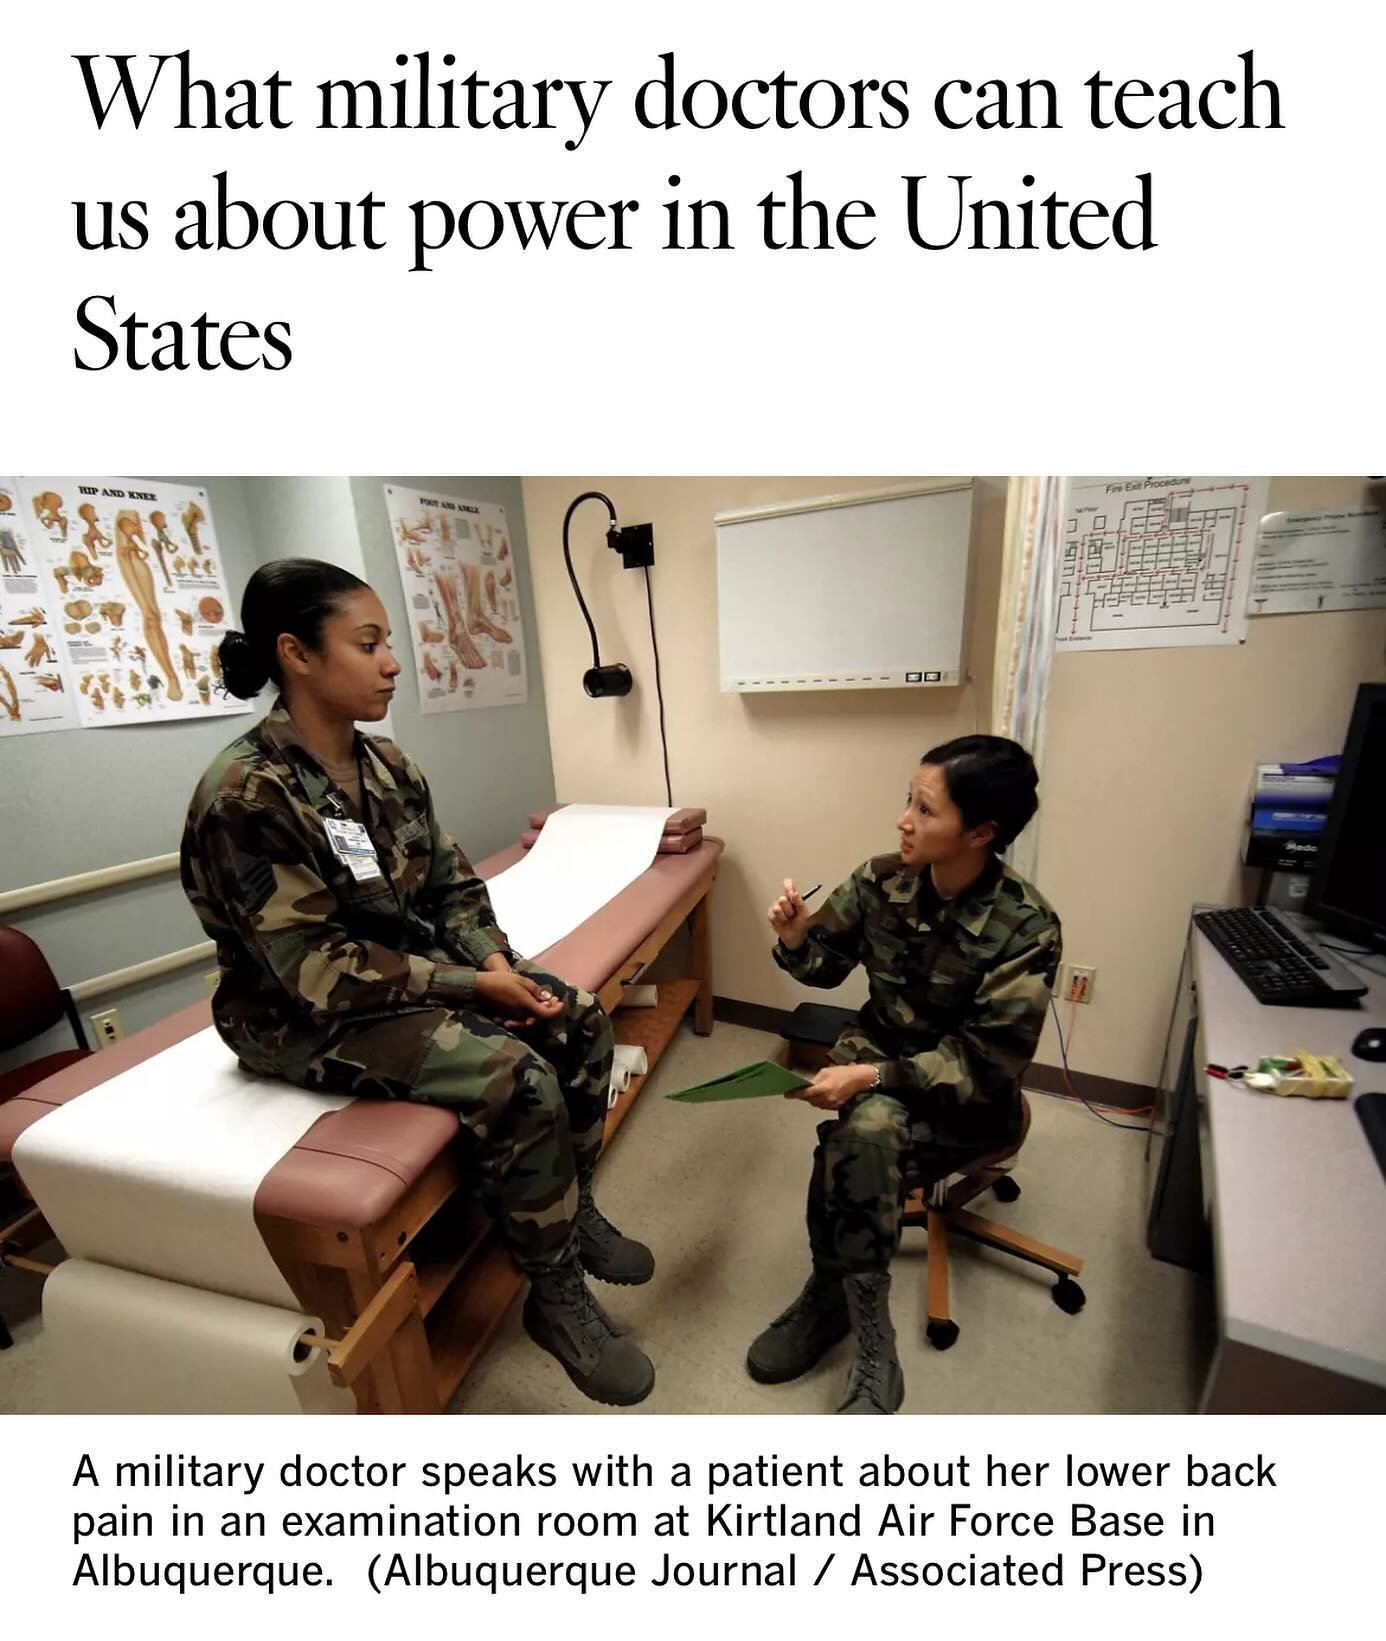 From the LA Times: Power is invisible, but its effects can be seen everywhere &mdash; especially in the health records of active duty military personnel.
By examining details of 1.5 million emergency room visits at U.S. military hospitals nationwide,